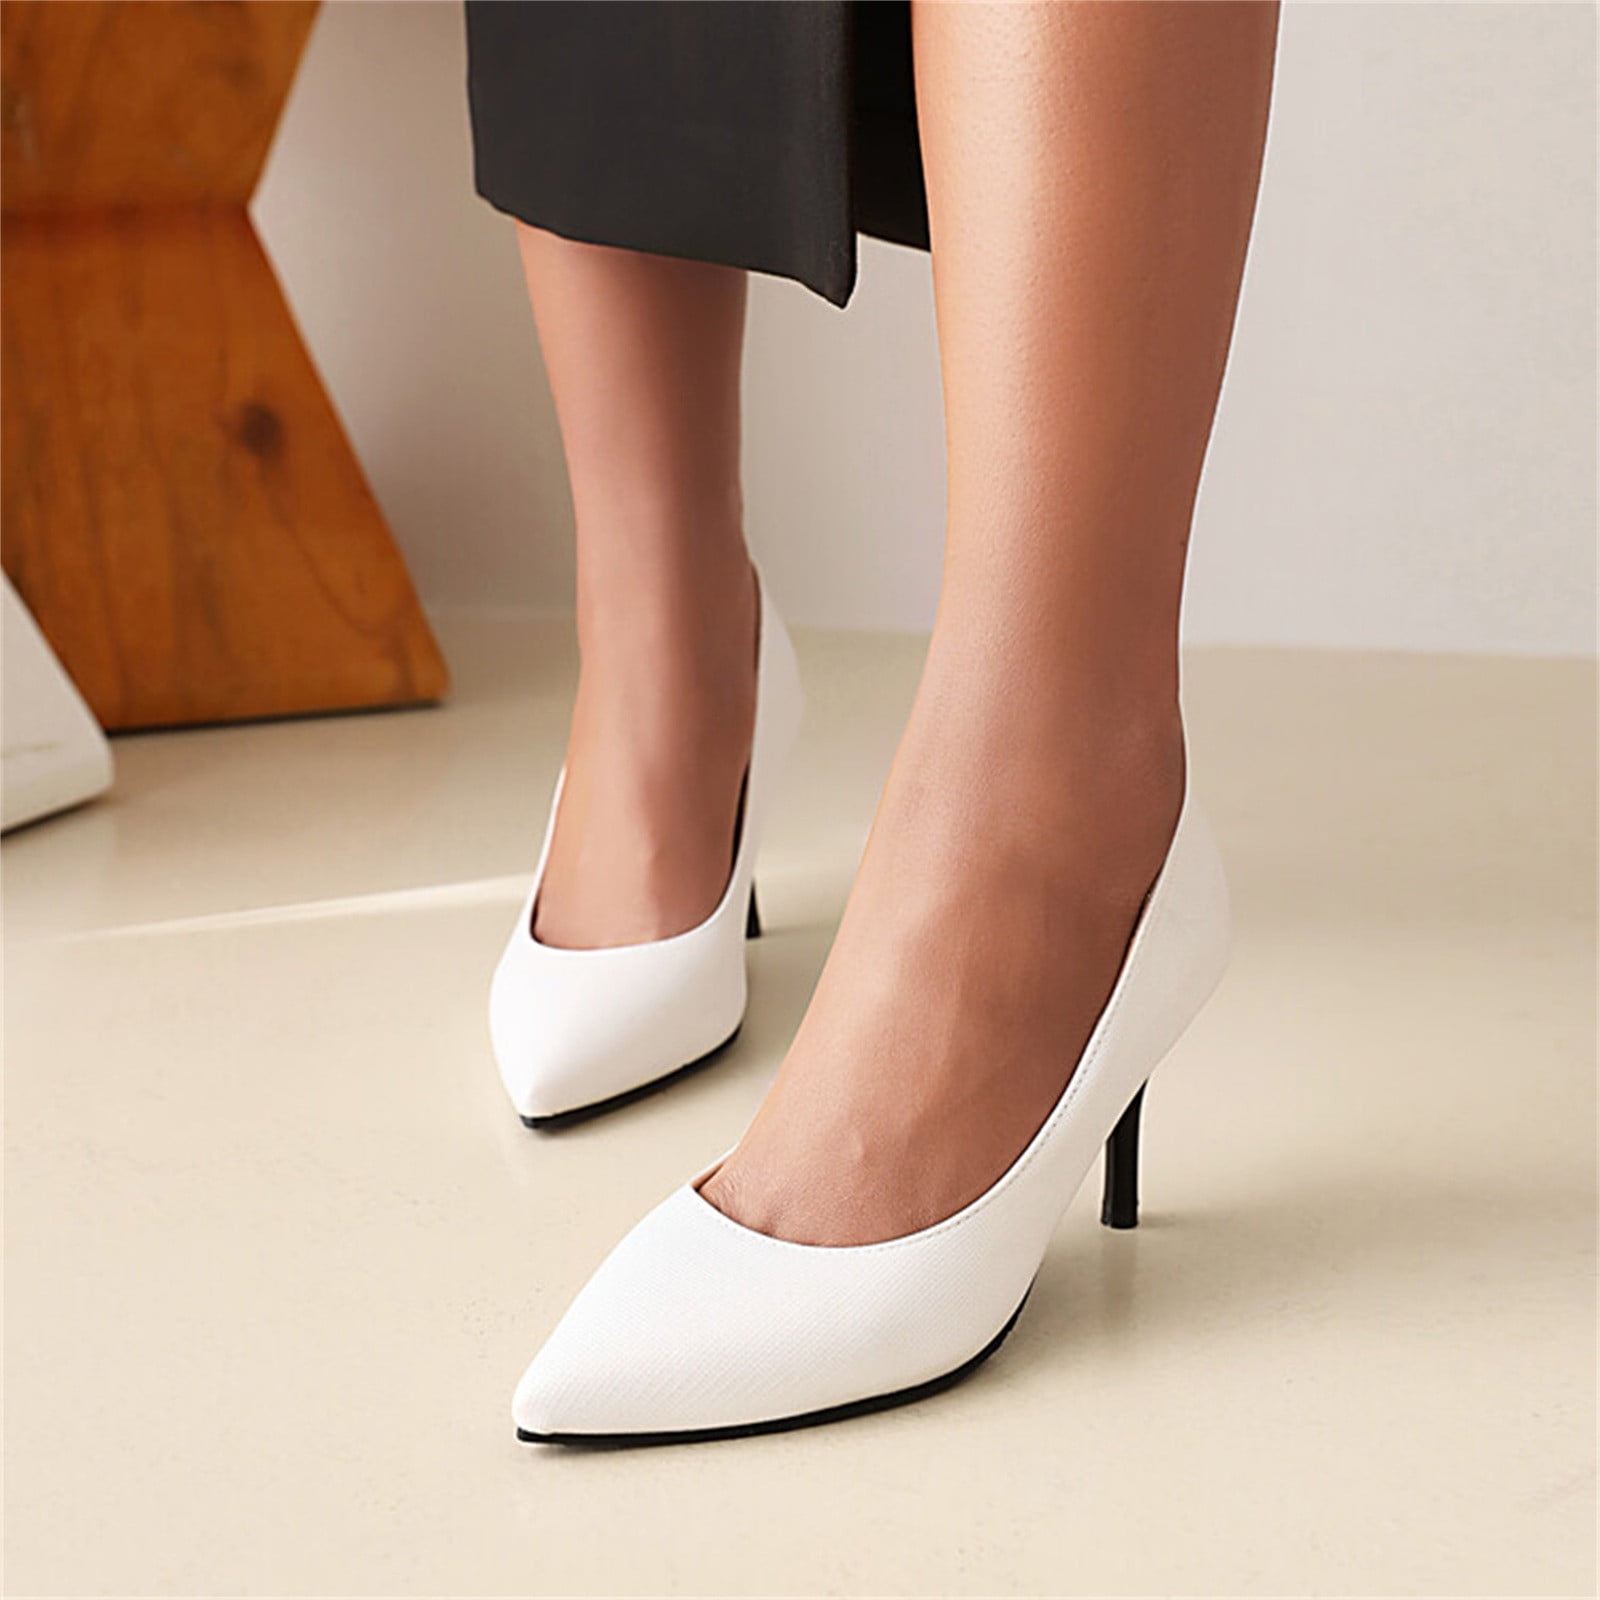 Elegant Pointy Toe Ladies Shoes Snake Binding Stiletto High Heels White  Women Pumps - China Pumps Heels and Nude Pumps price | Made-in-China.com